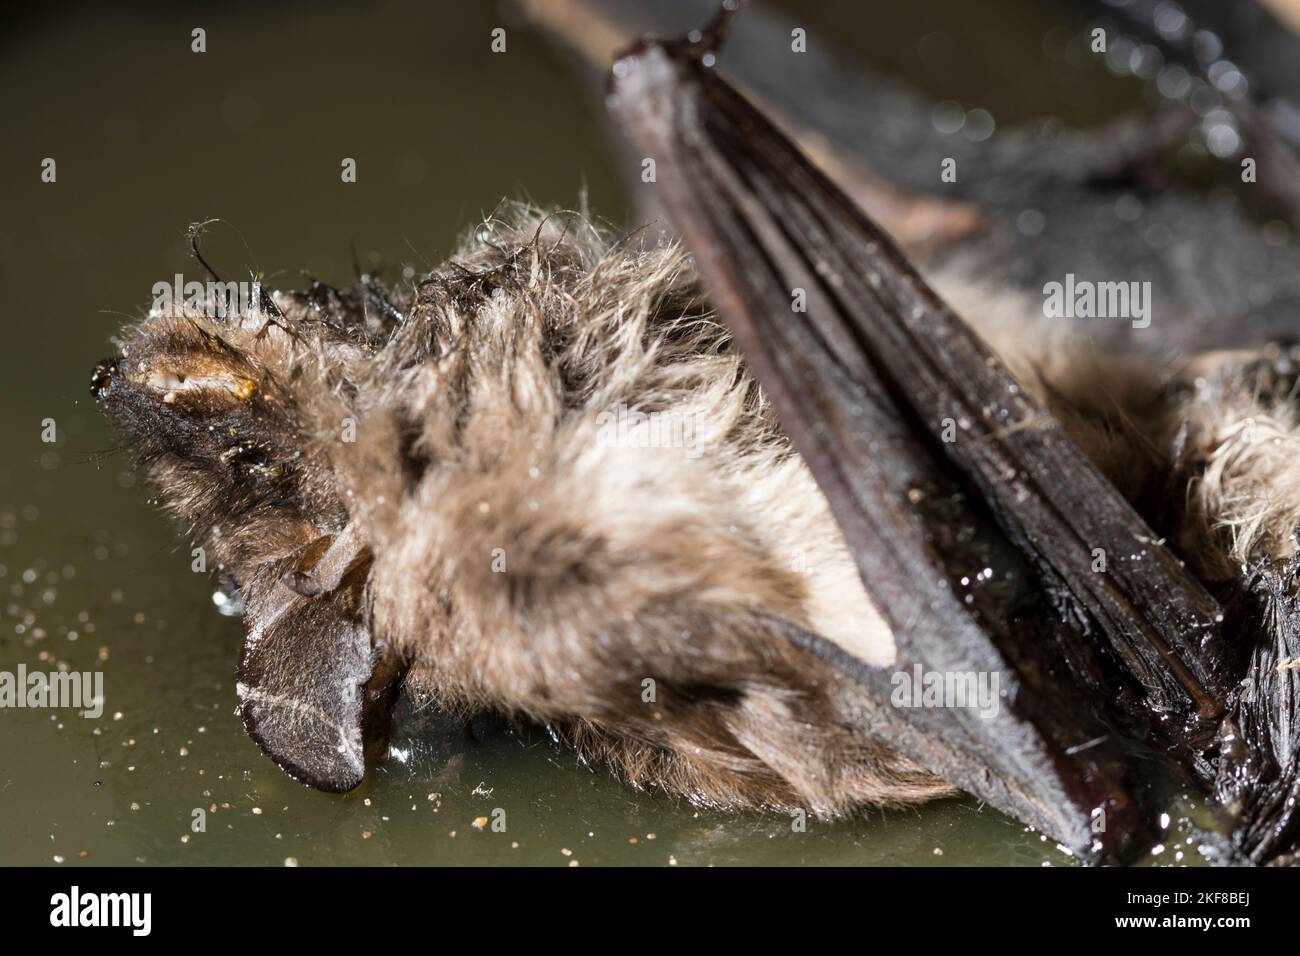 Brown bat dead close up in rodent trap. Stock Photo